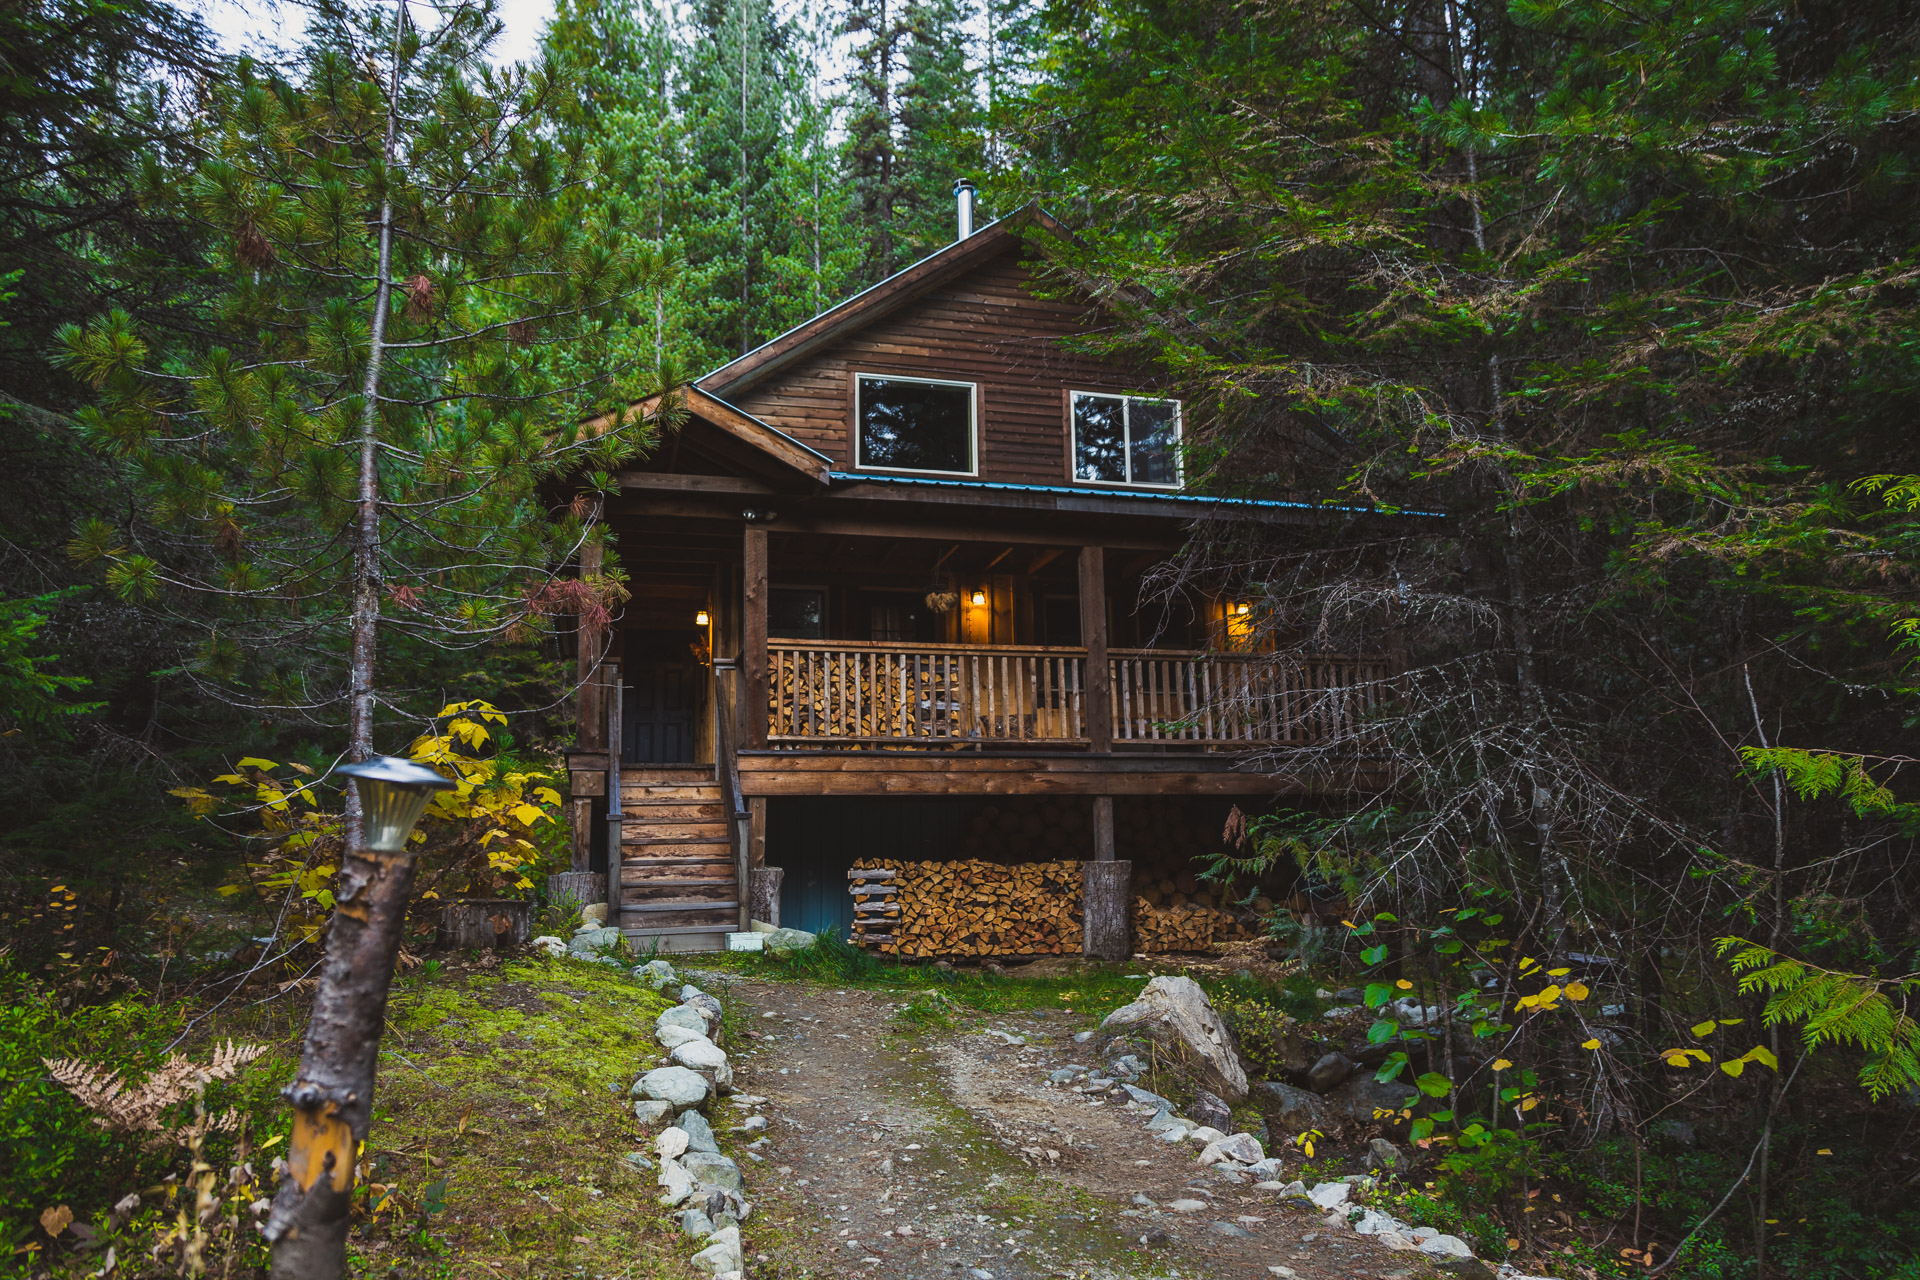 A Peaceful Cabin In The Canadian Woods At Logden Lodge - Roadesque